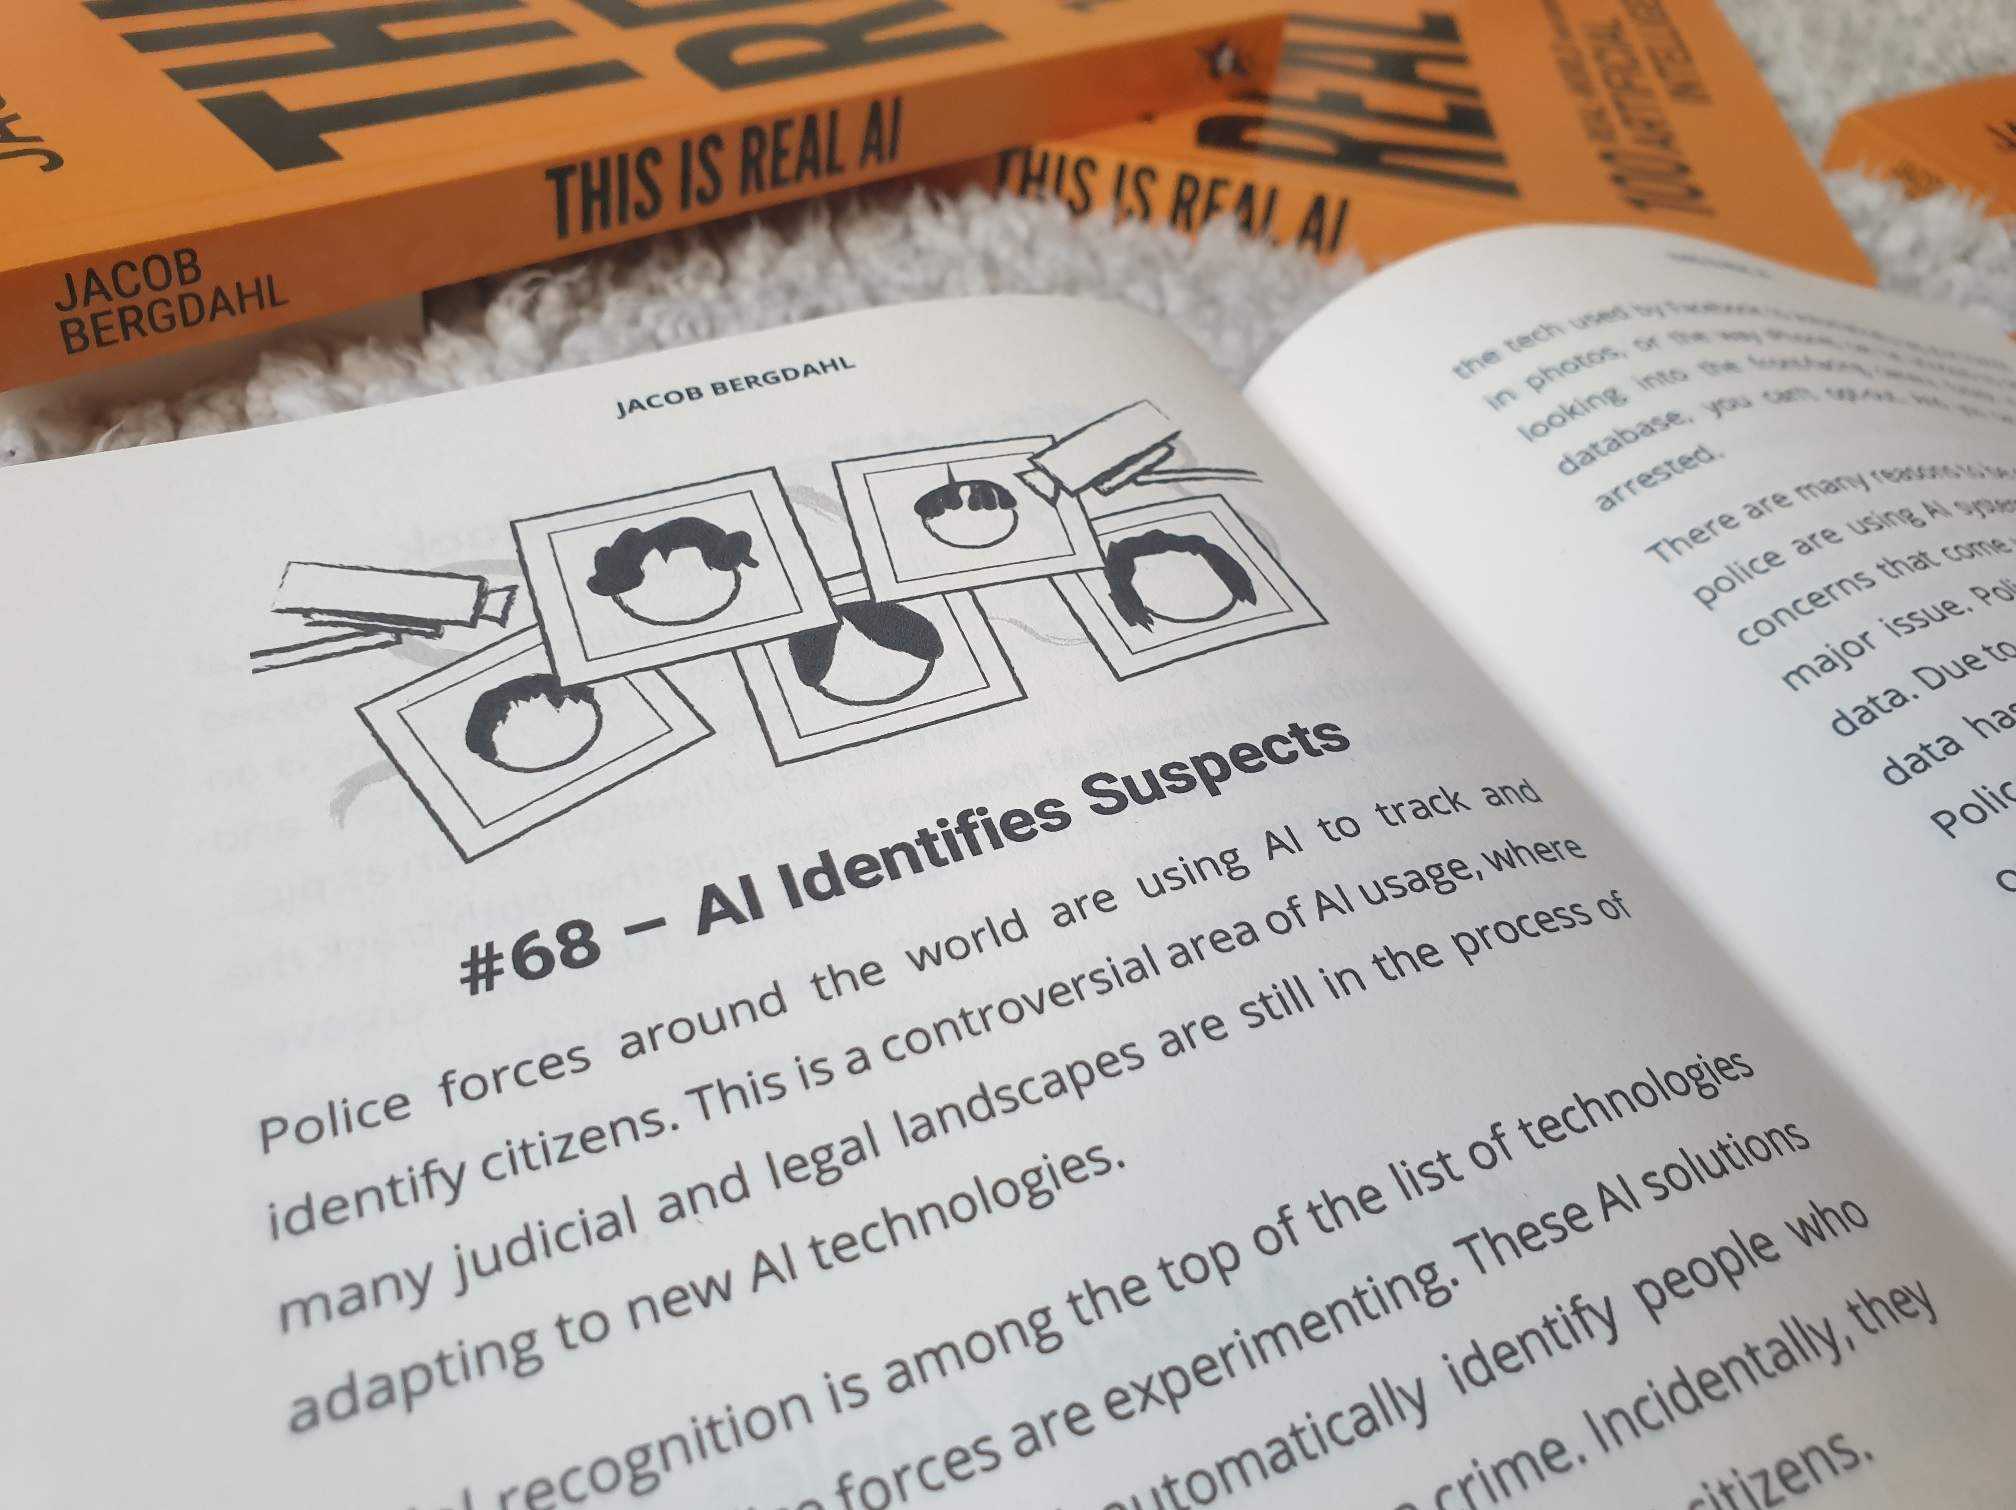 The book This Is Real AI